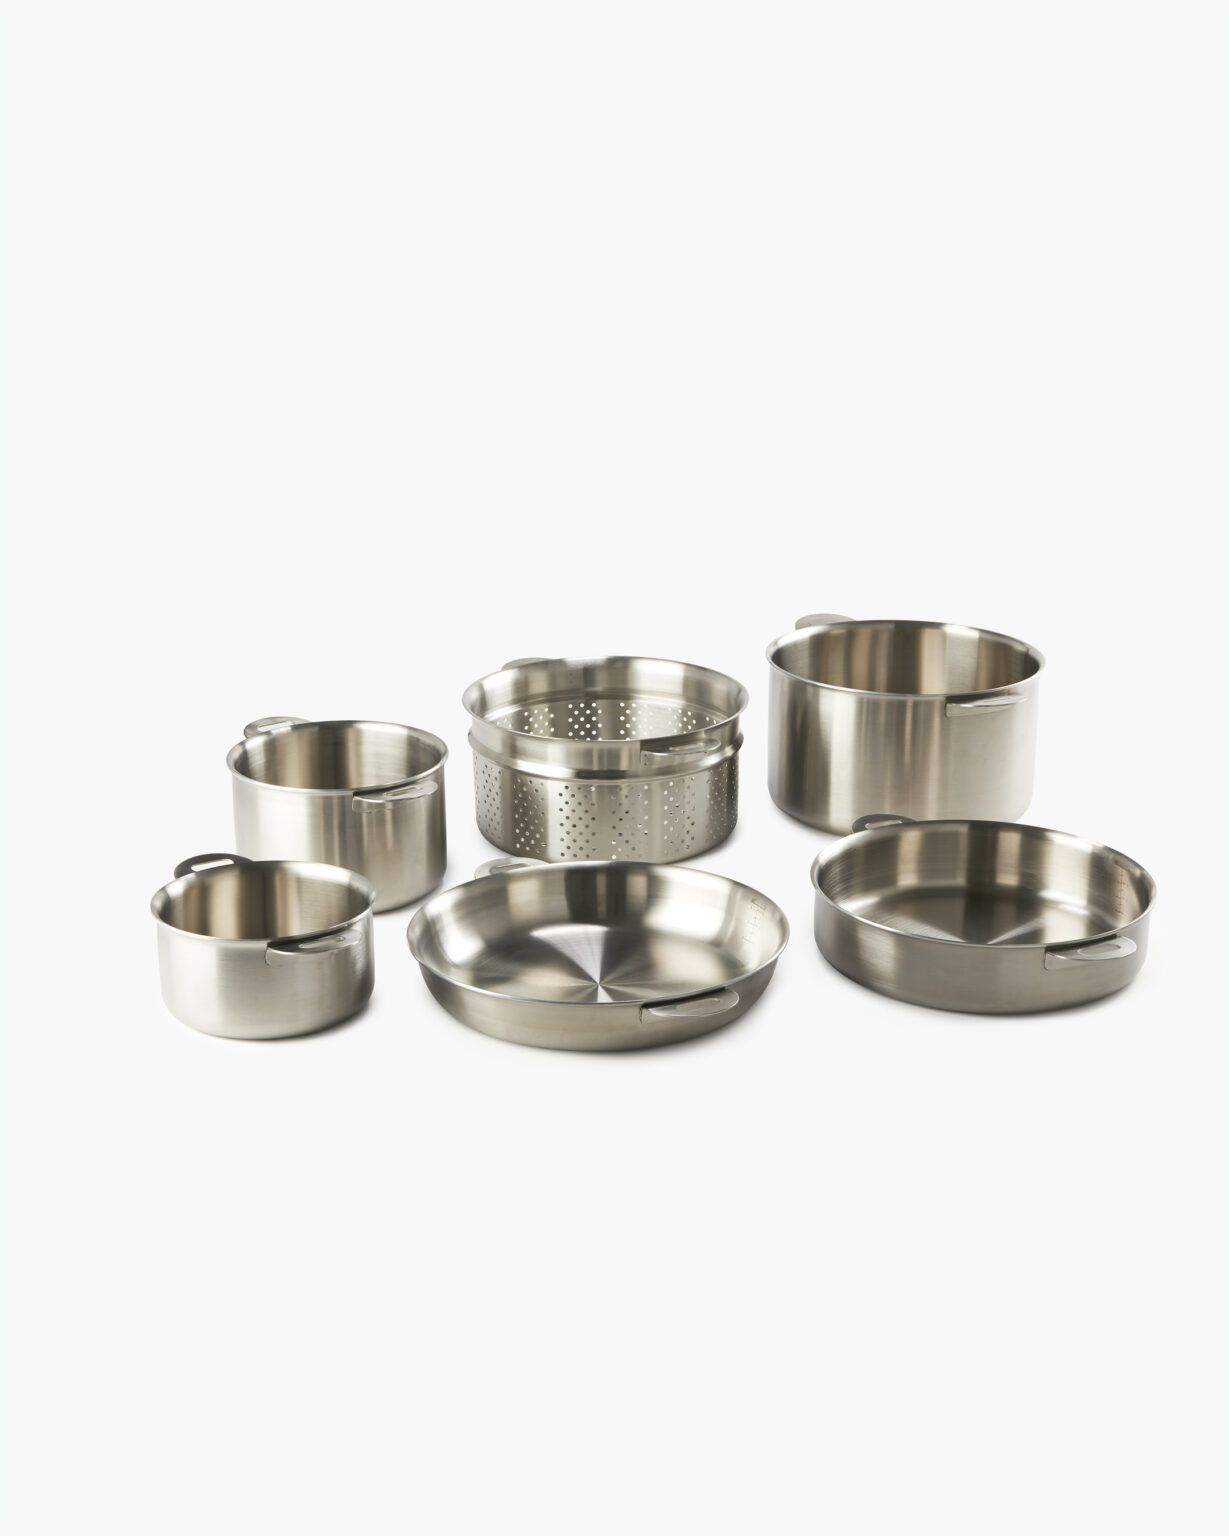 ENSEMBL Stackware Full6 Stainless Steel Fully Clad Cookware